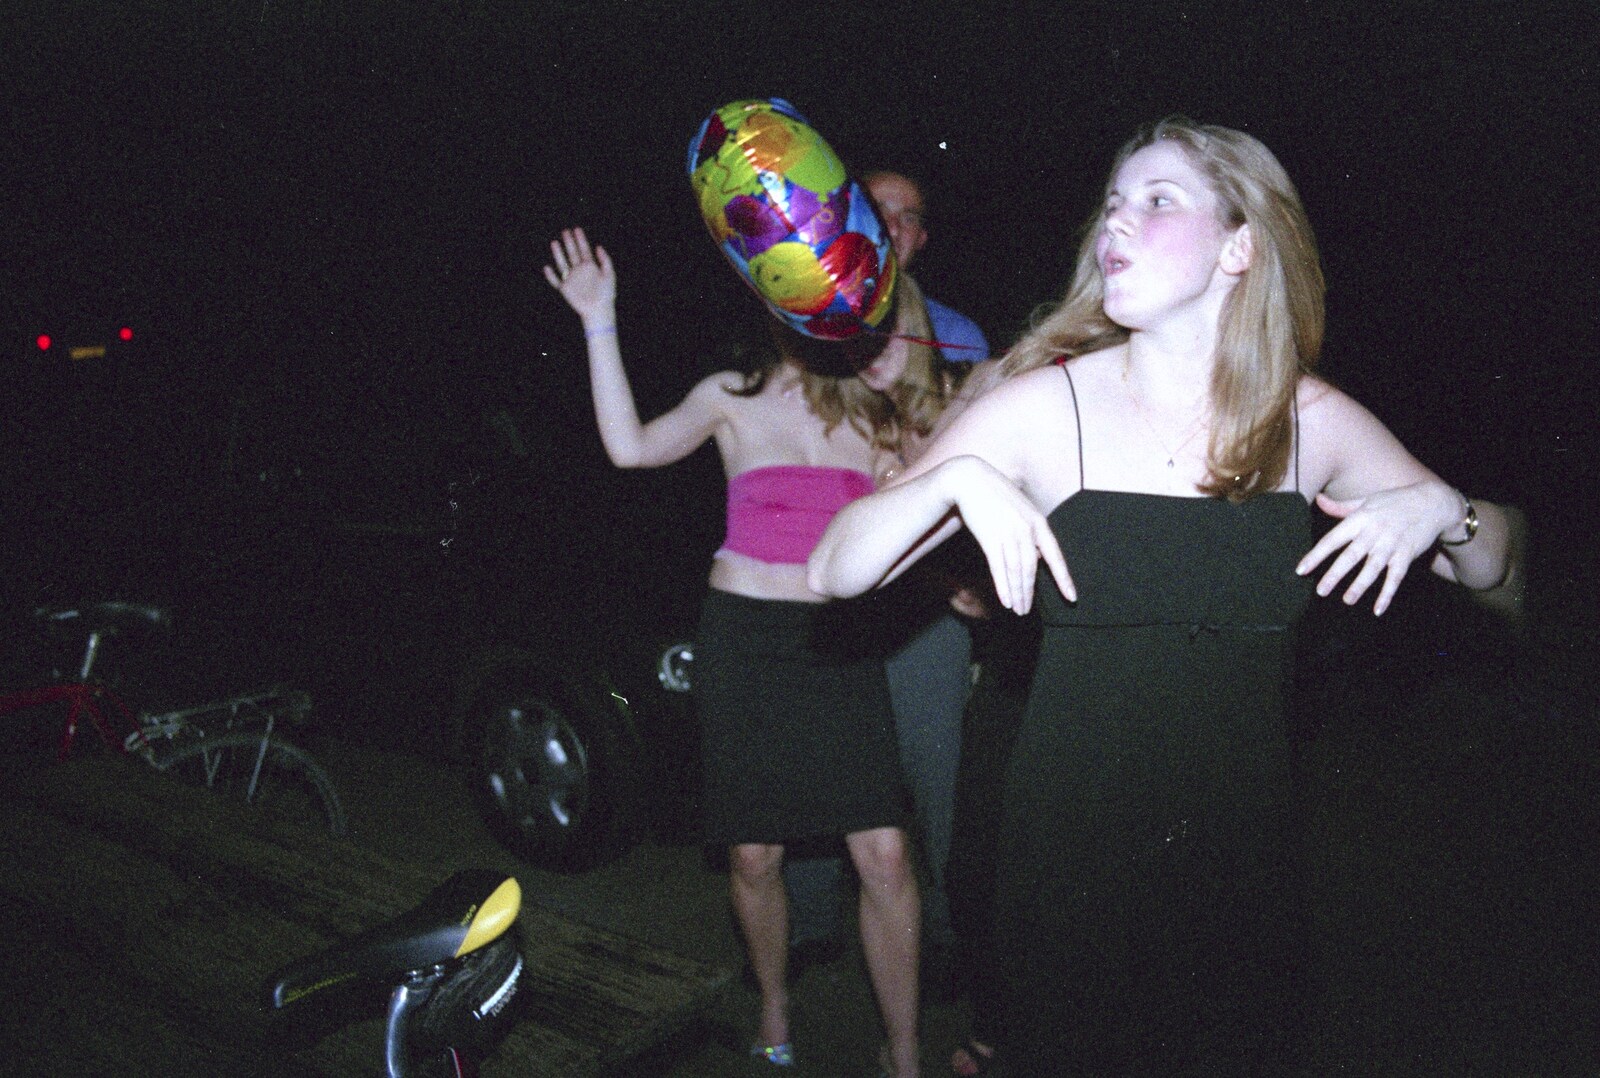 Lorraine takes her balloon outside from Lorraine's 21st Birthday, The Swan, Suffolk - 10th June 2000